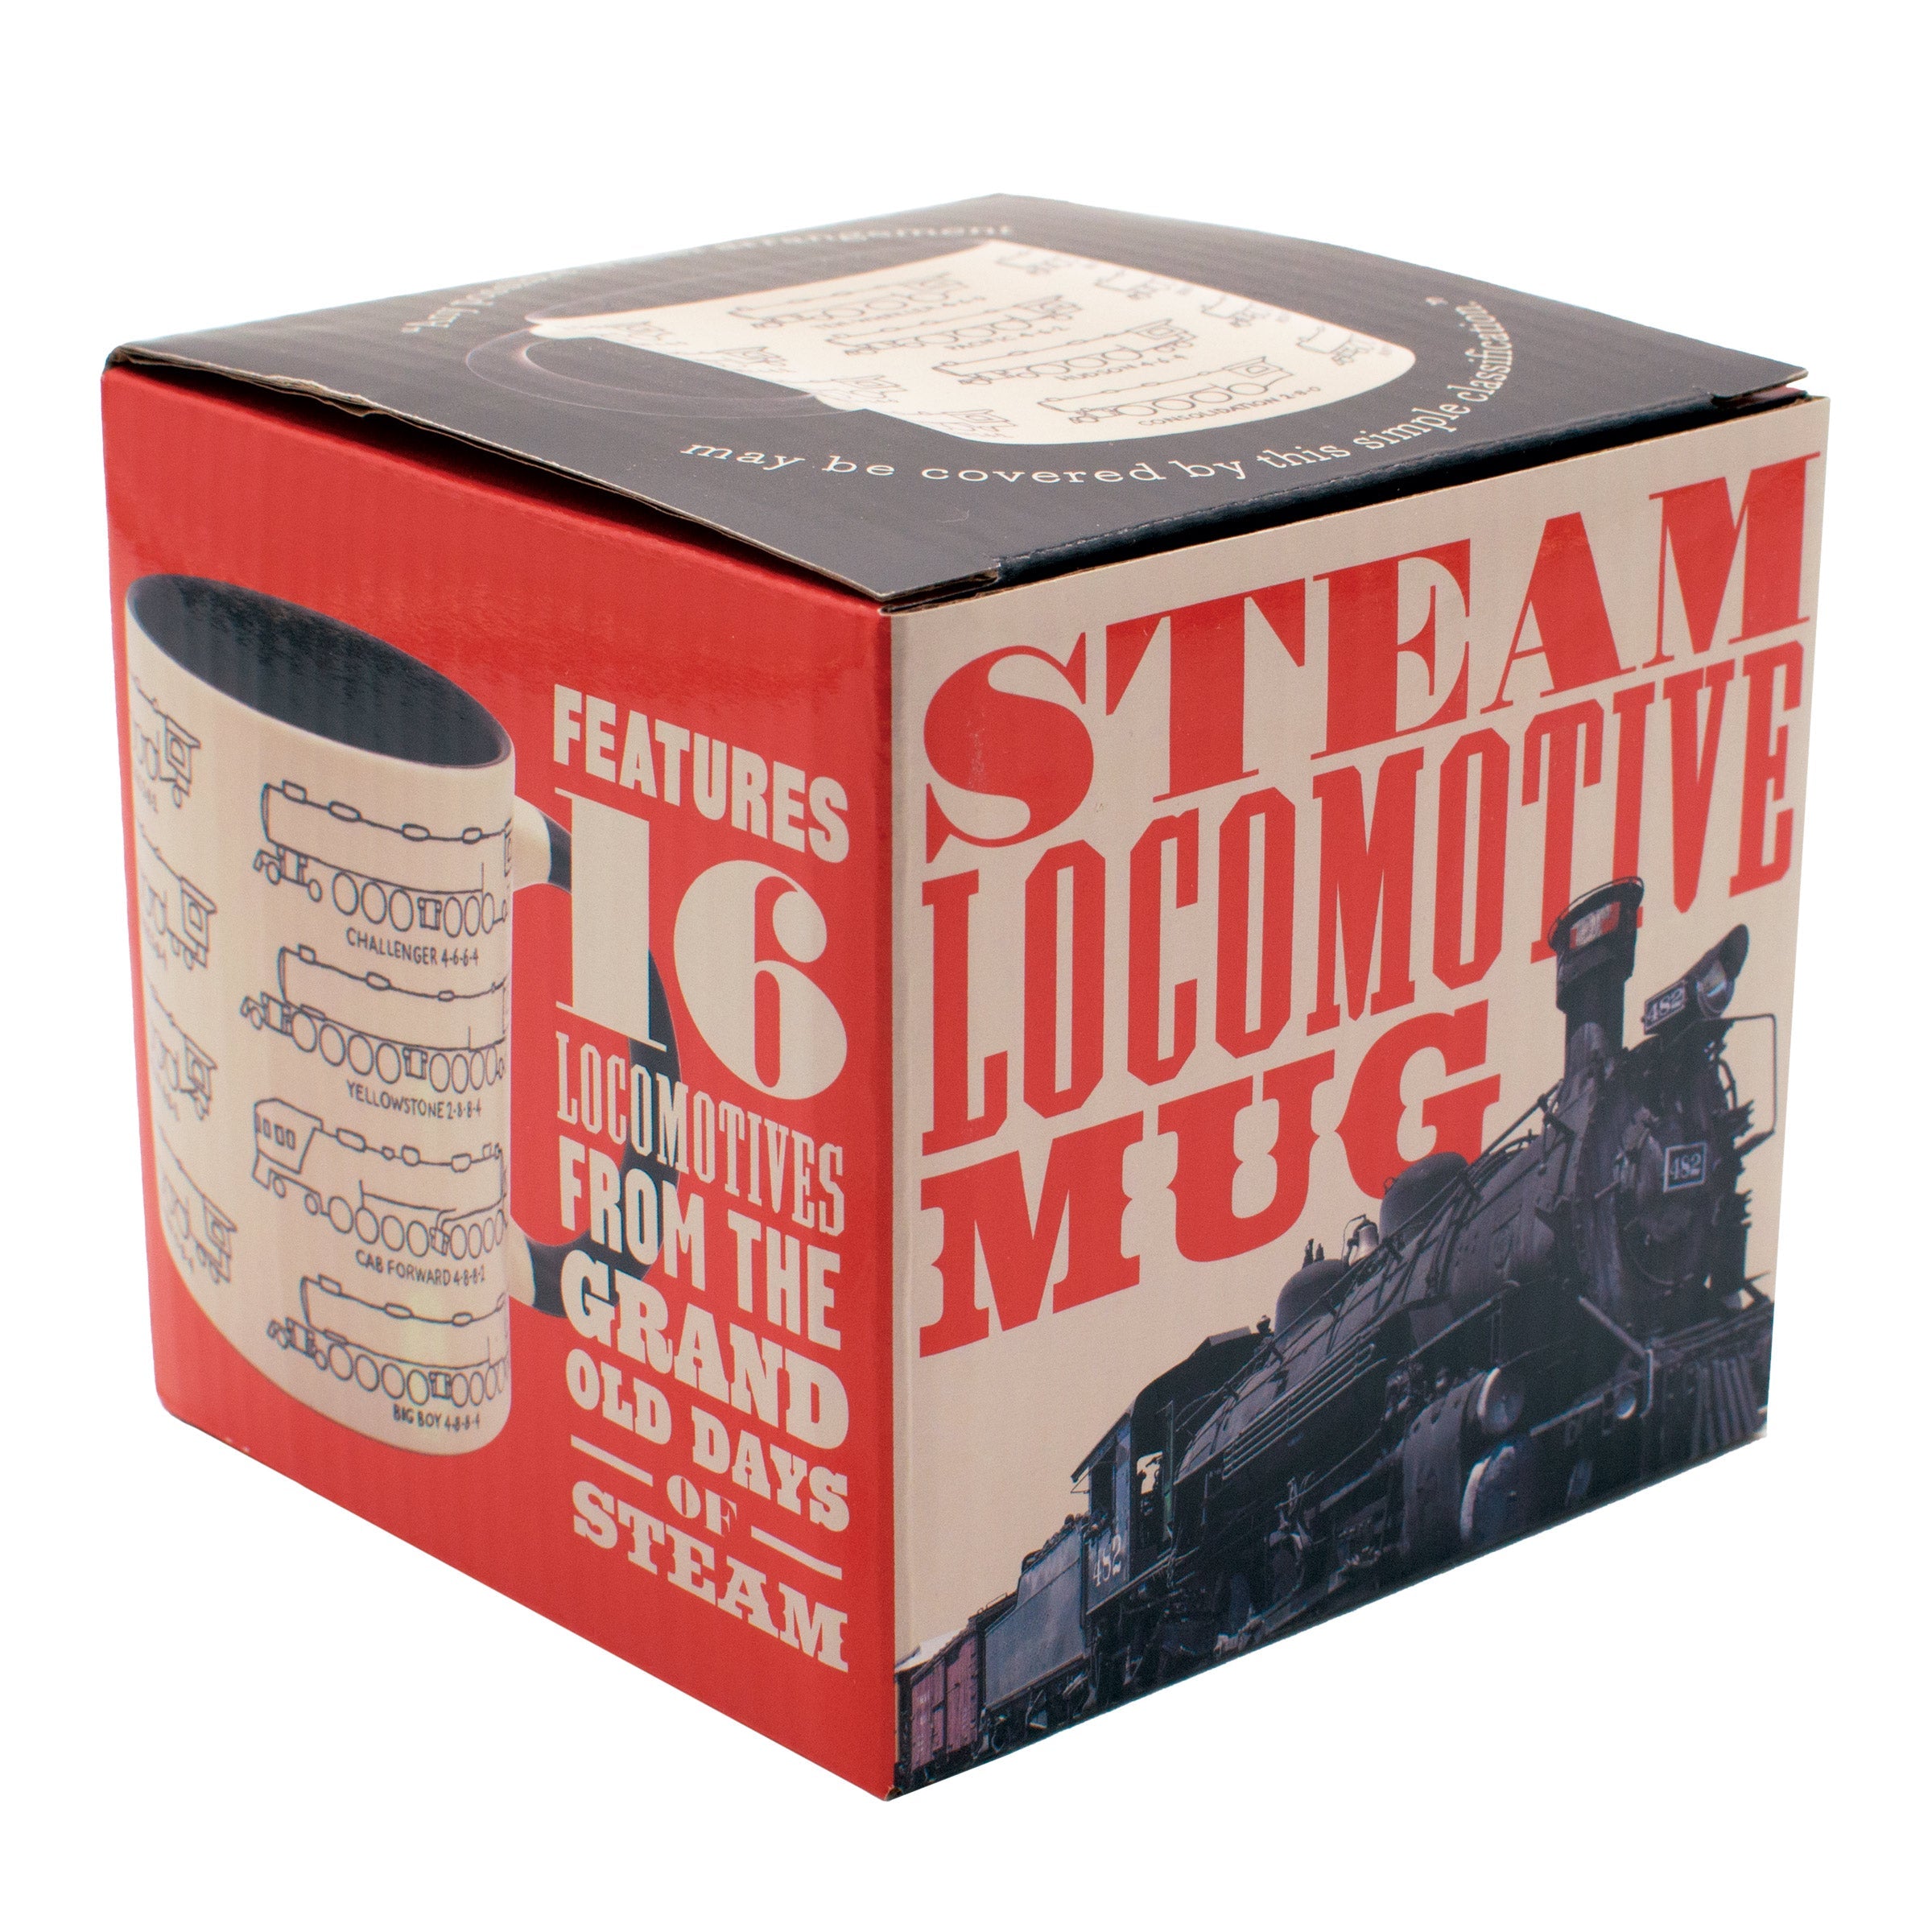 Product photo of Steam Locomotive Mug, a novelty gift manufactured by The Unemployed Philosophers Guild.